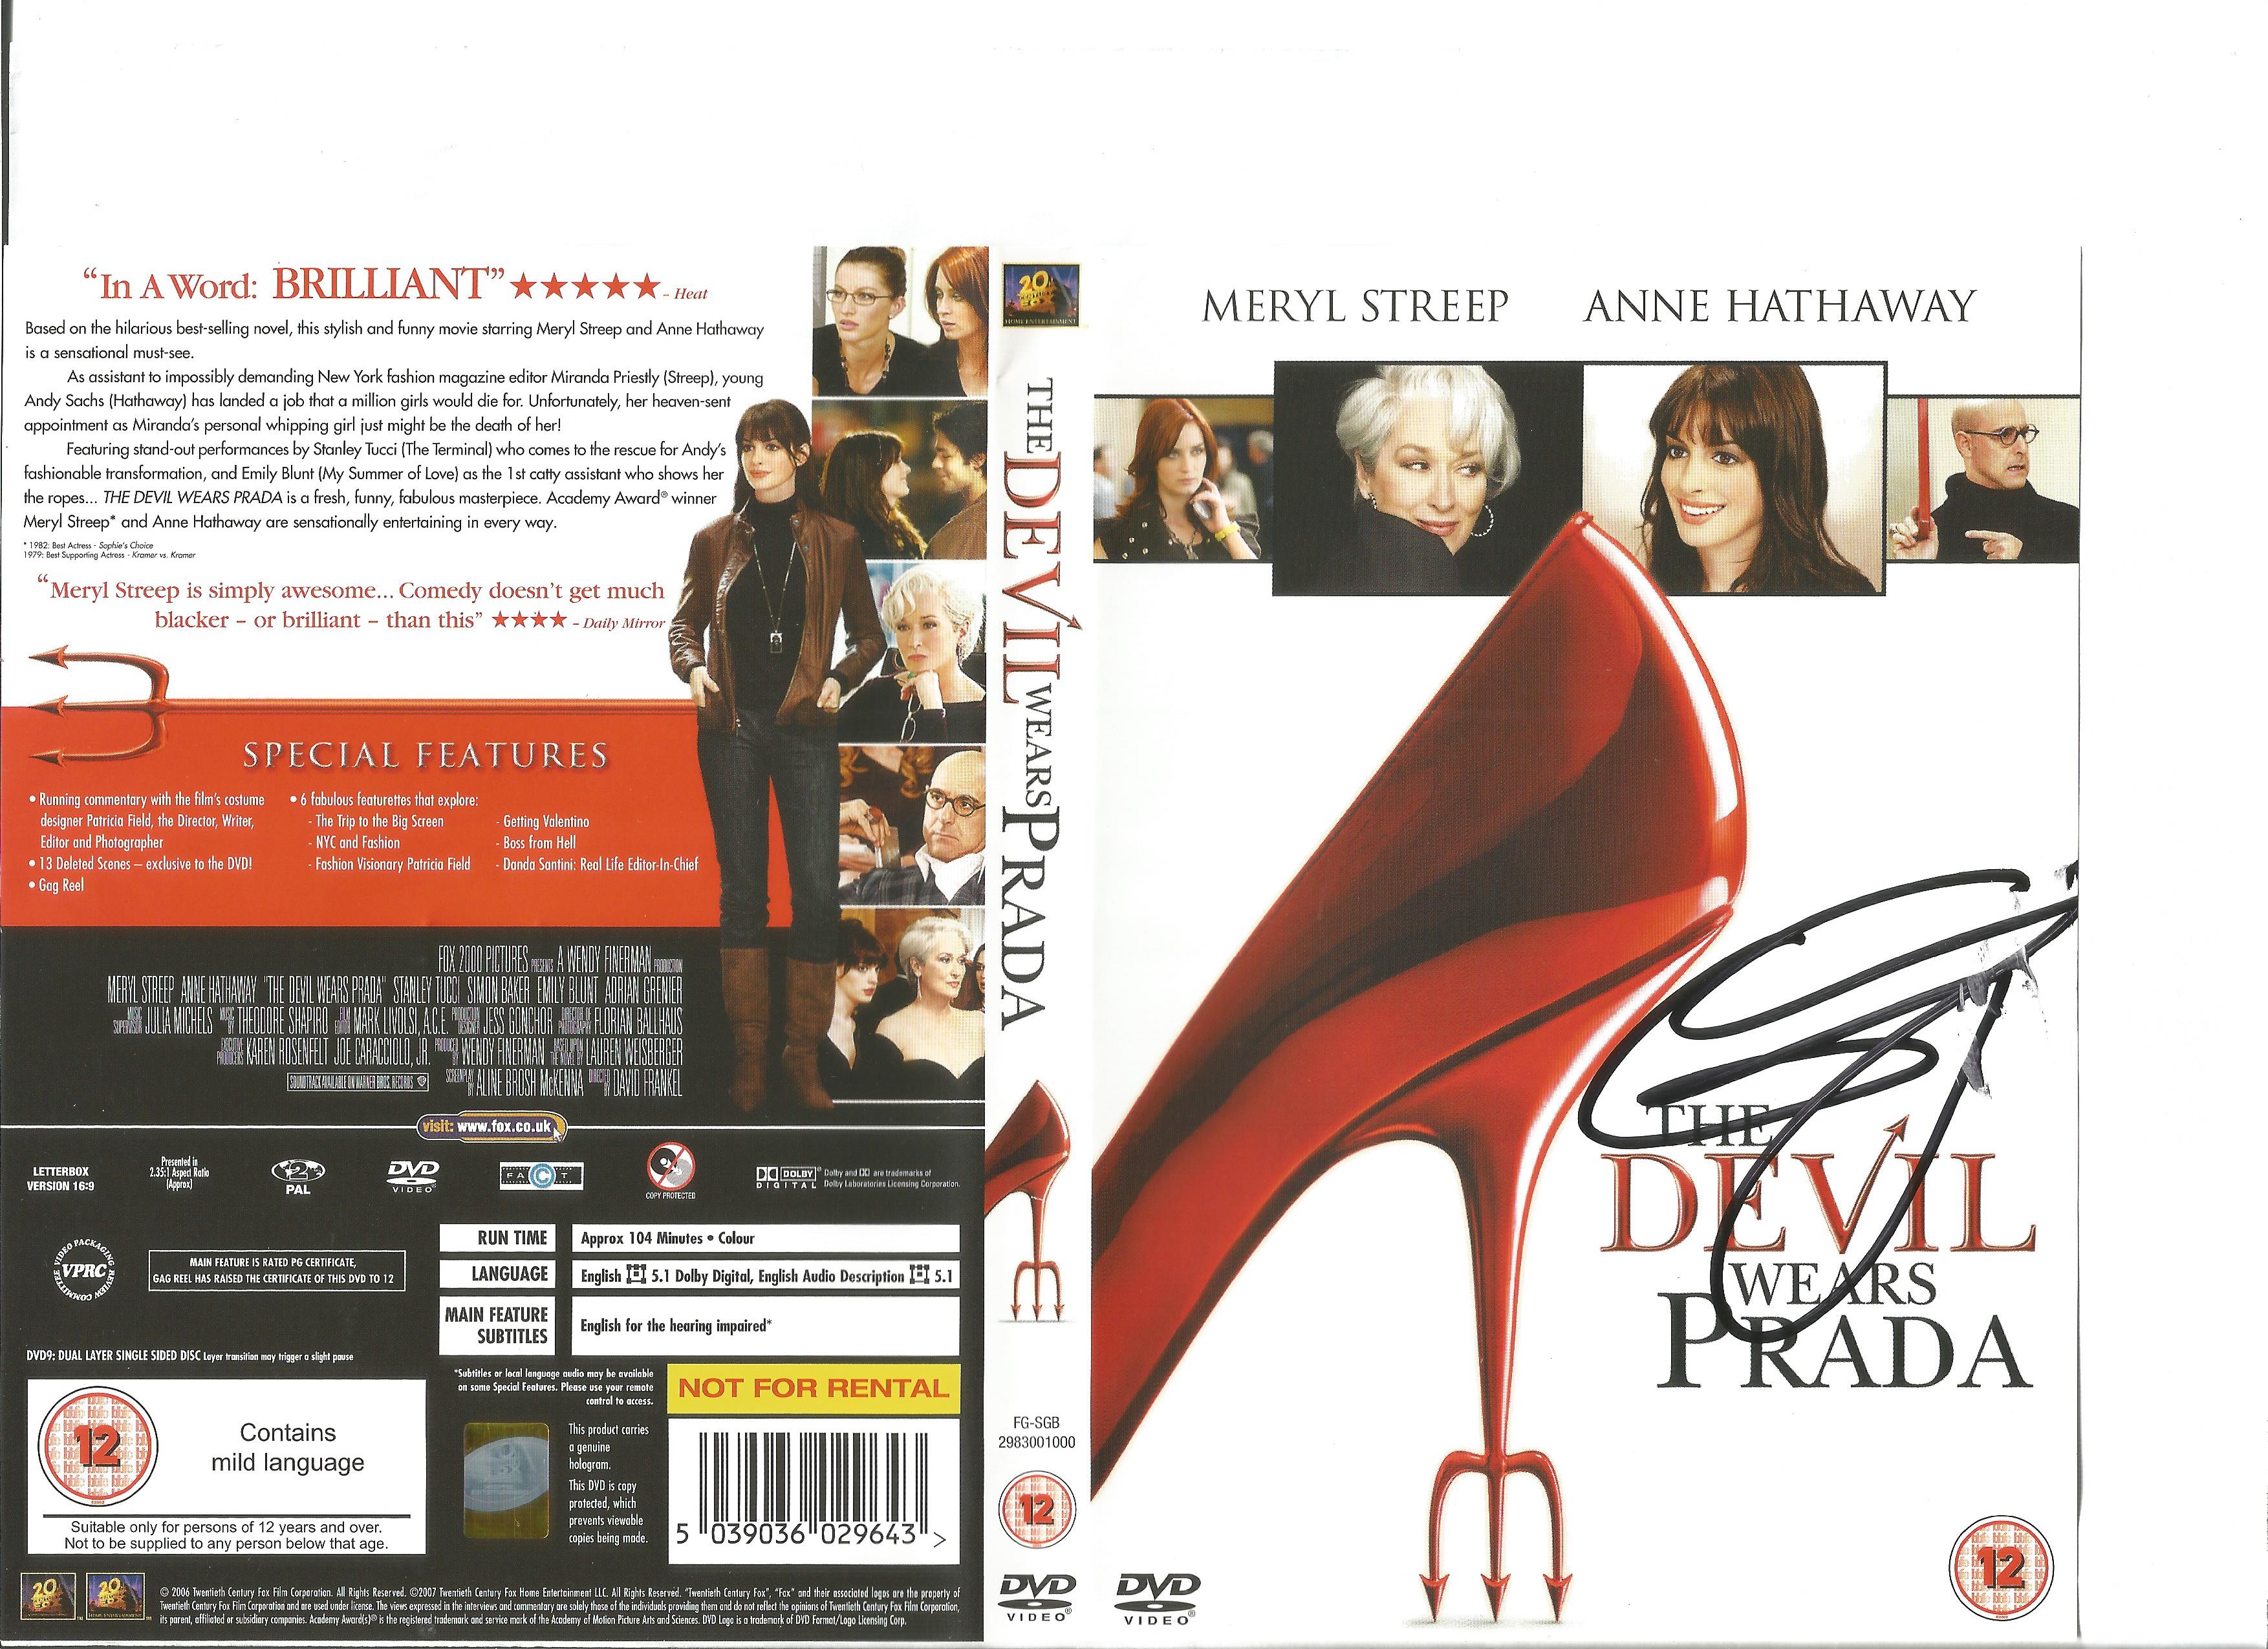 Anne Hathaway signed DVD sleeve for The Devil Wears Prada. DVD included. Good Condition. All